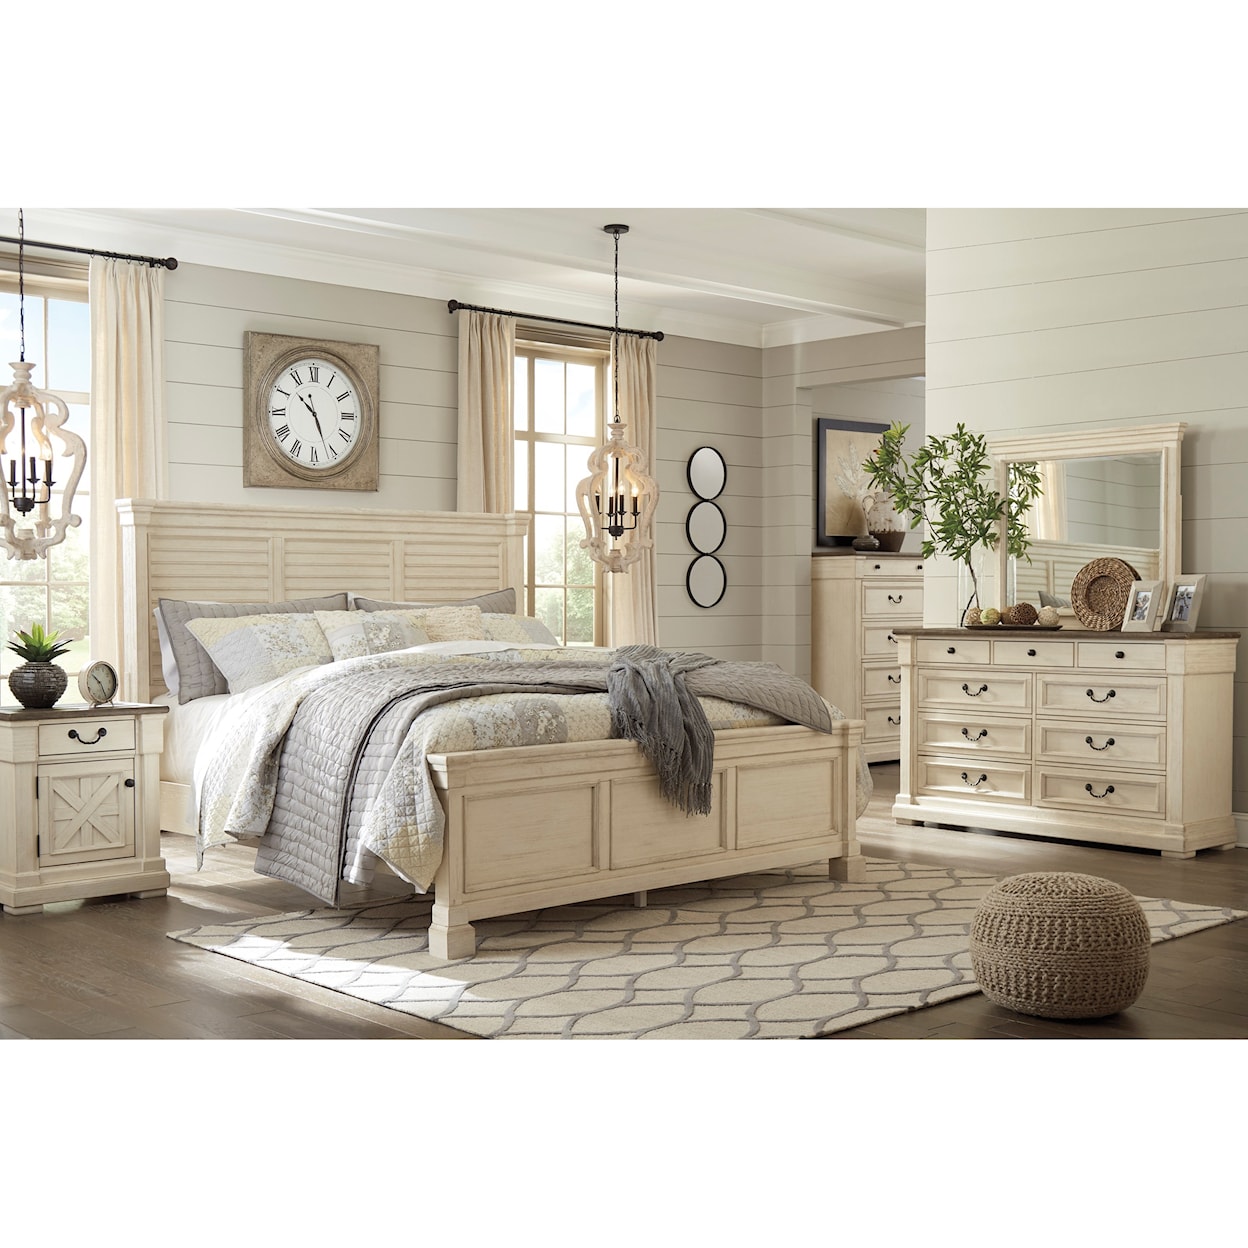 Signature Design by Ashley Bolanburg Queen Bedroom Group